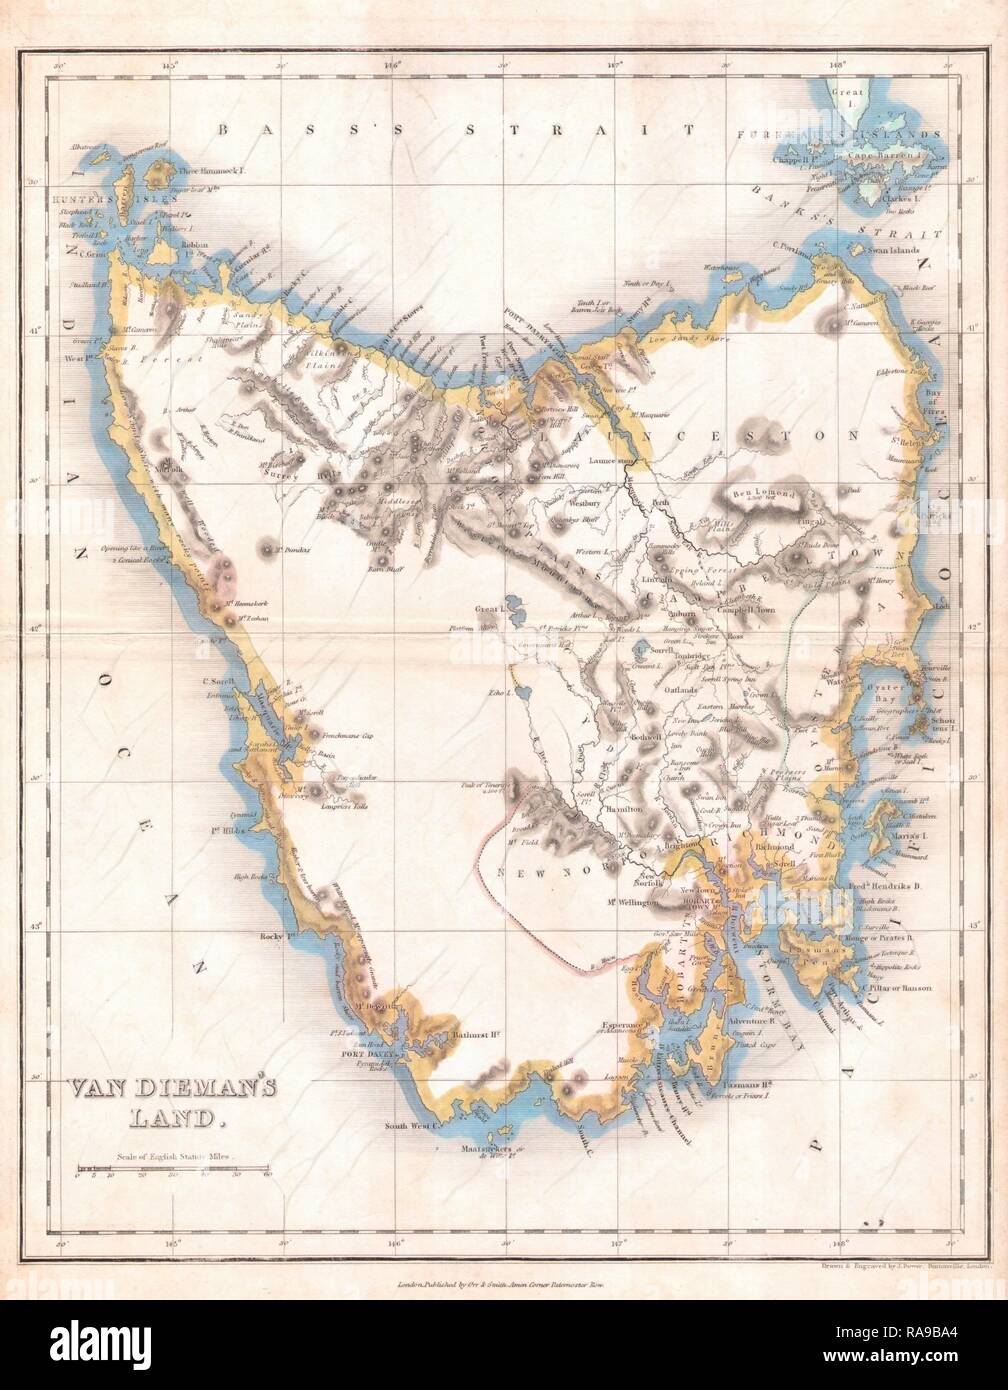 1837, Dower Map of Van Dieman's Land or Tasmania. Reimagined by Gibon. Classic art with a modern twist reimagined Stock Photo